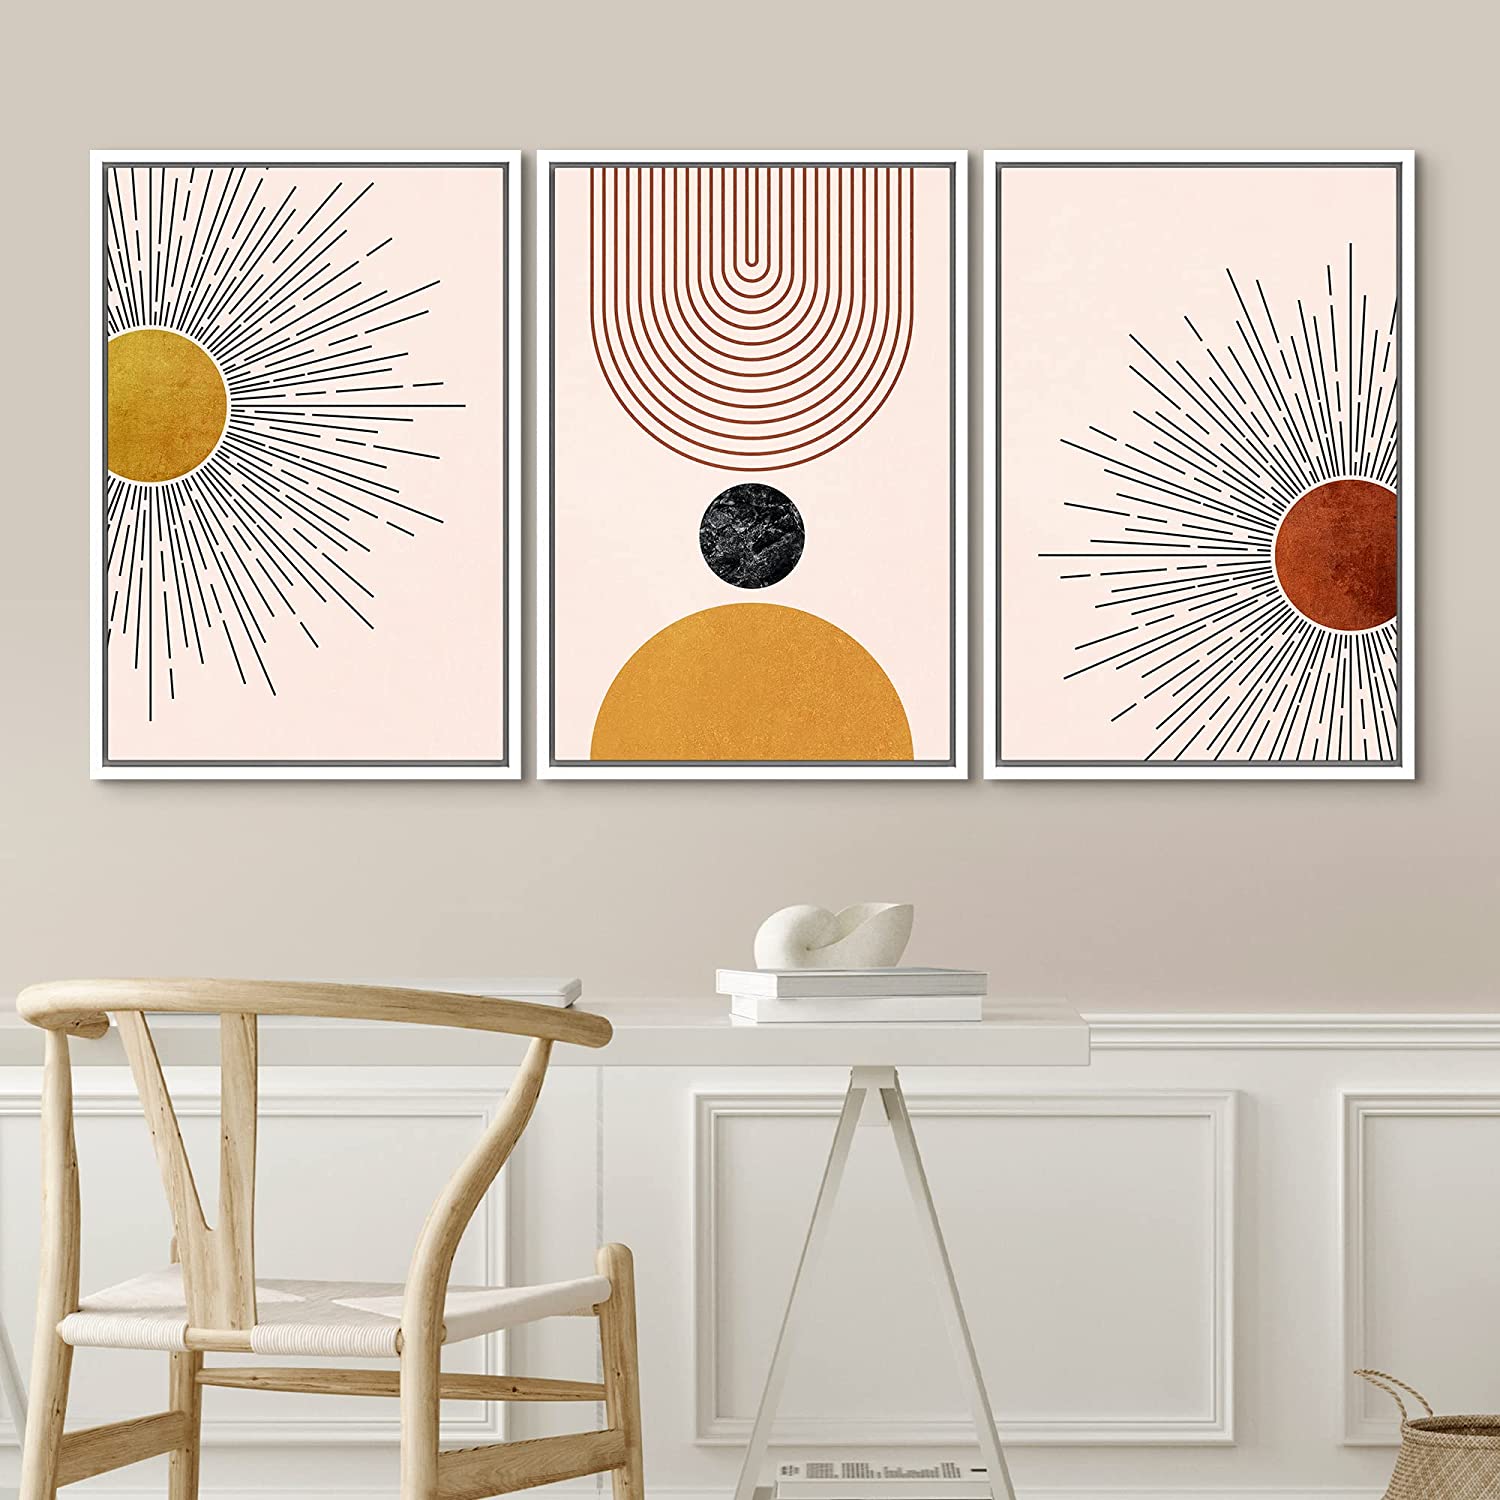 IDEA4WALL Framed Canvas Print Wall Art Set Mid-Century Geometric Solar Sun  Space Planets Abstract Shapes Minimalism Boho Decorative for Living Room,  Bedroom, Office 24